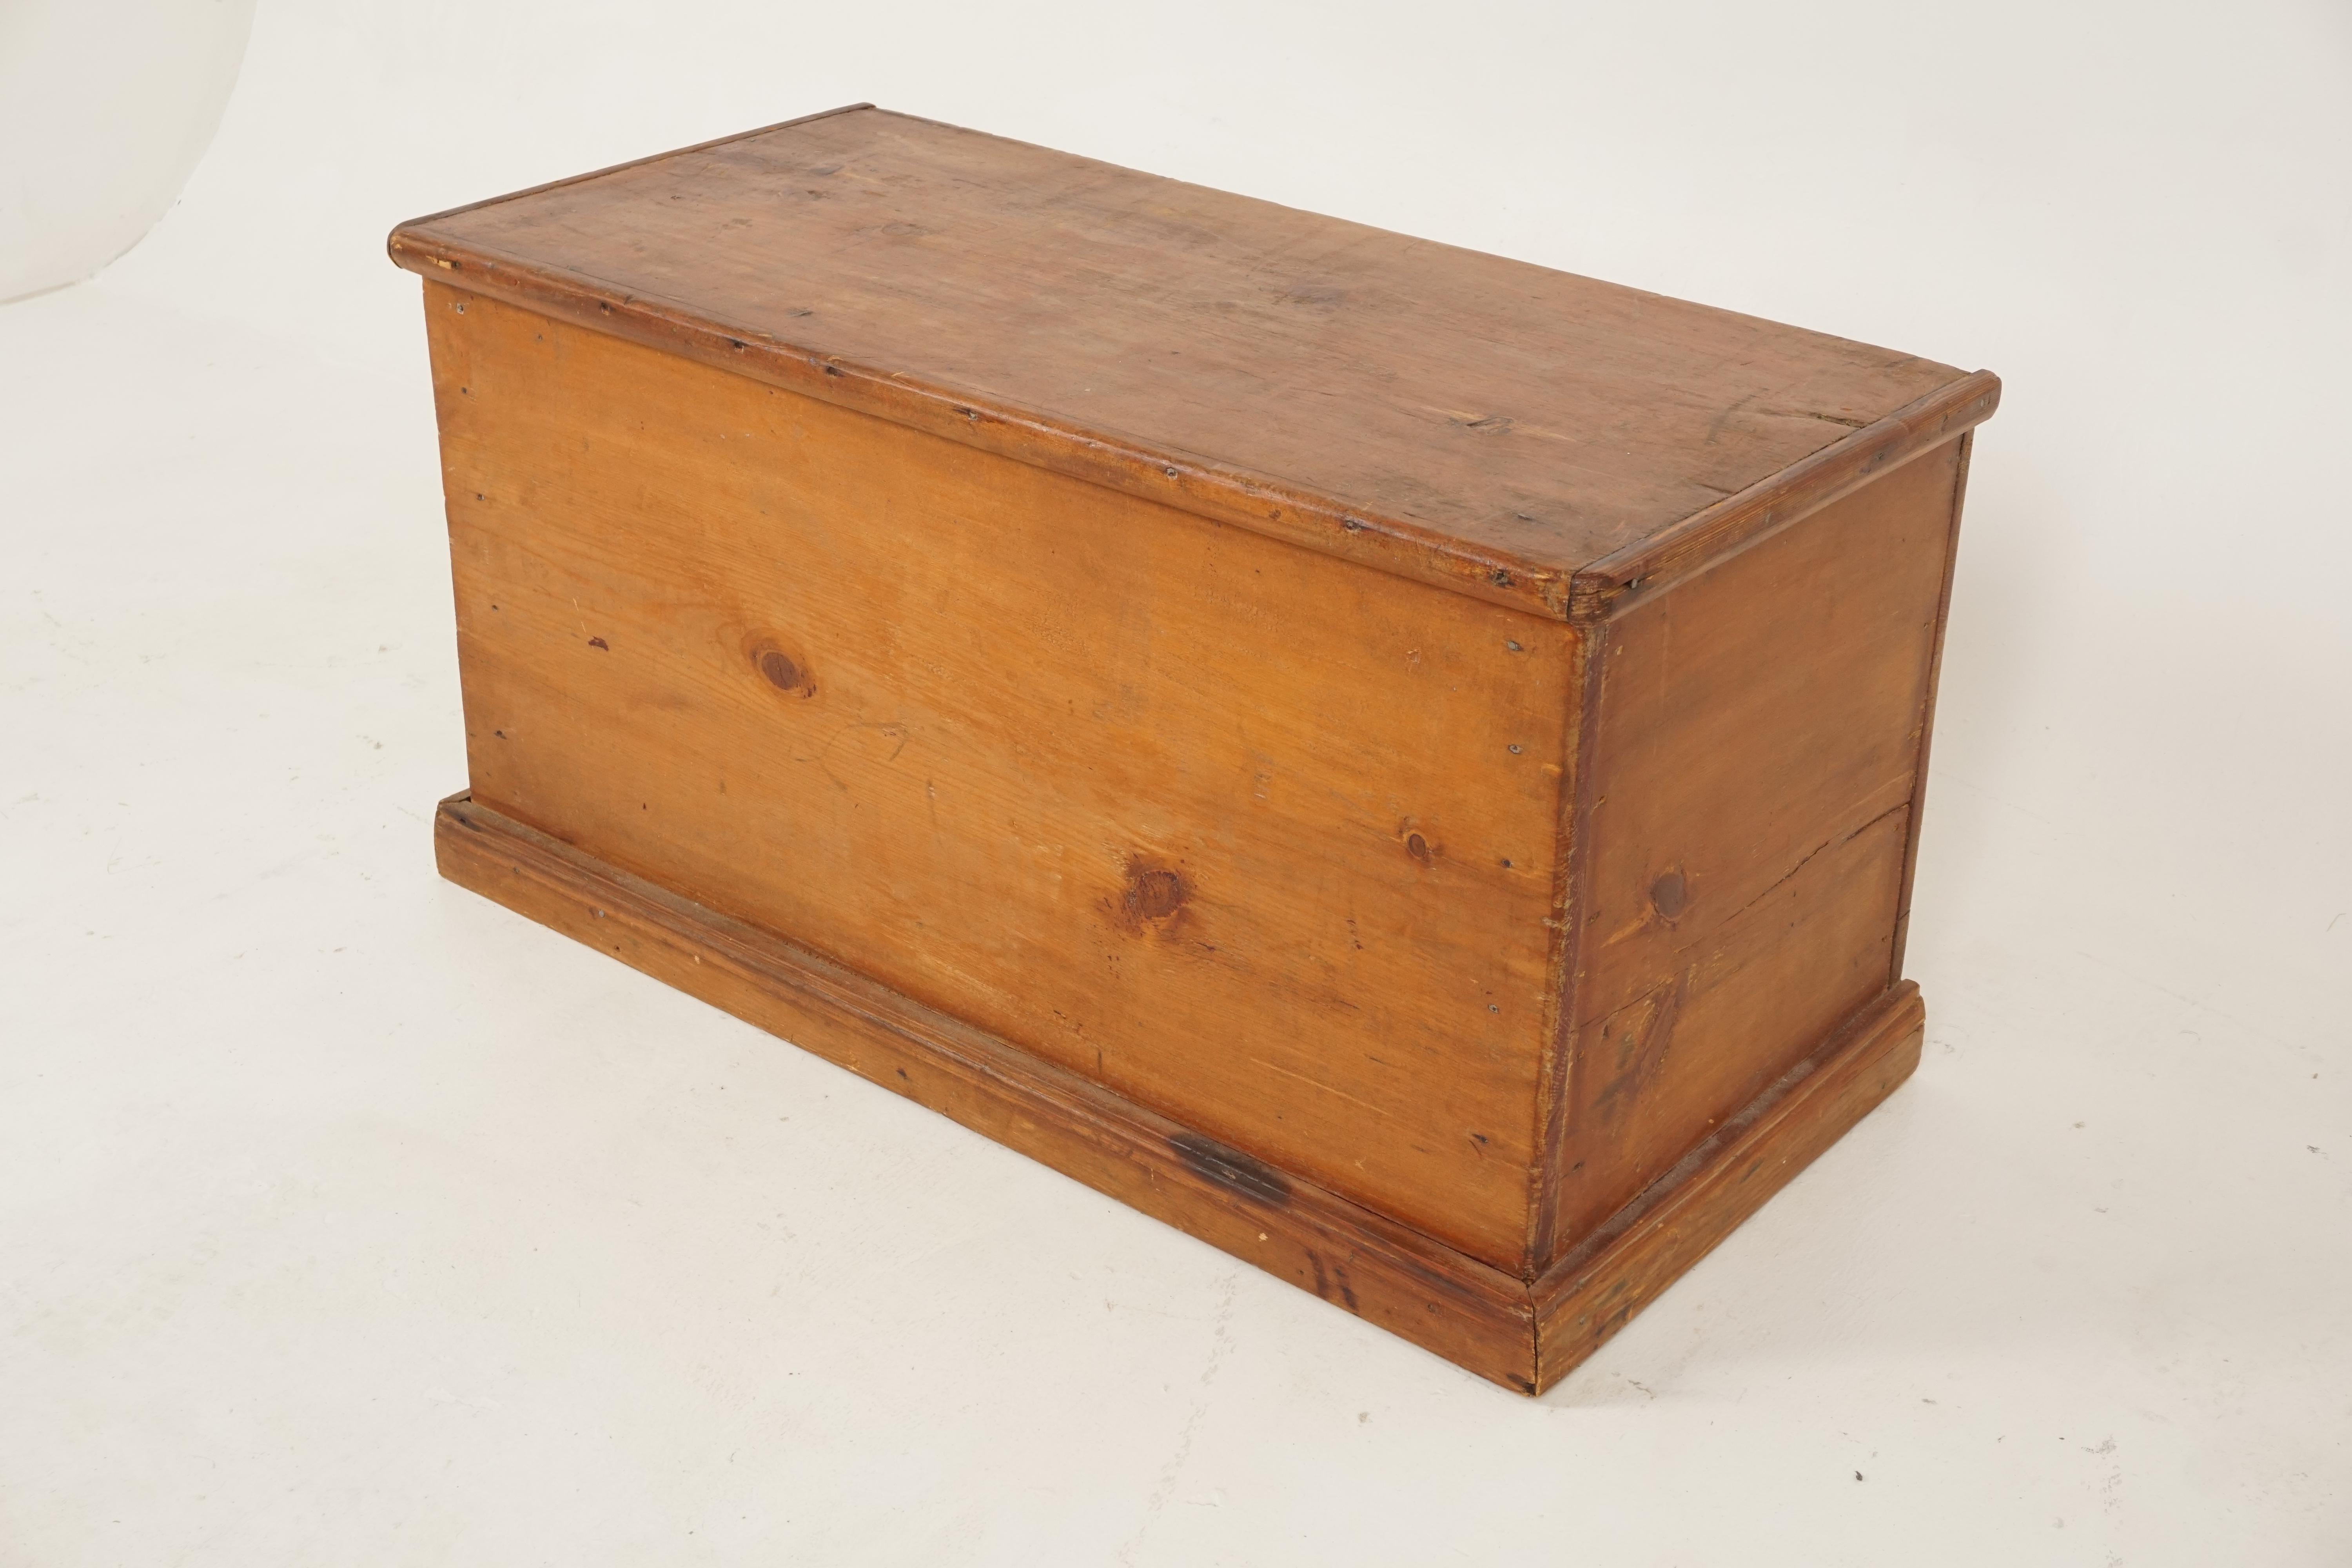 Antique Victorian blanket box, pine toy box, coffee table, Scotland 1890, B2527

Scotland 1890
Solid pine
Original finish
Single plank top with moulded edge
Hinged lid opens to reveal large storage compartment
All standing on a plinth